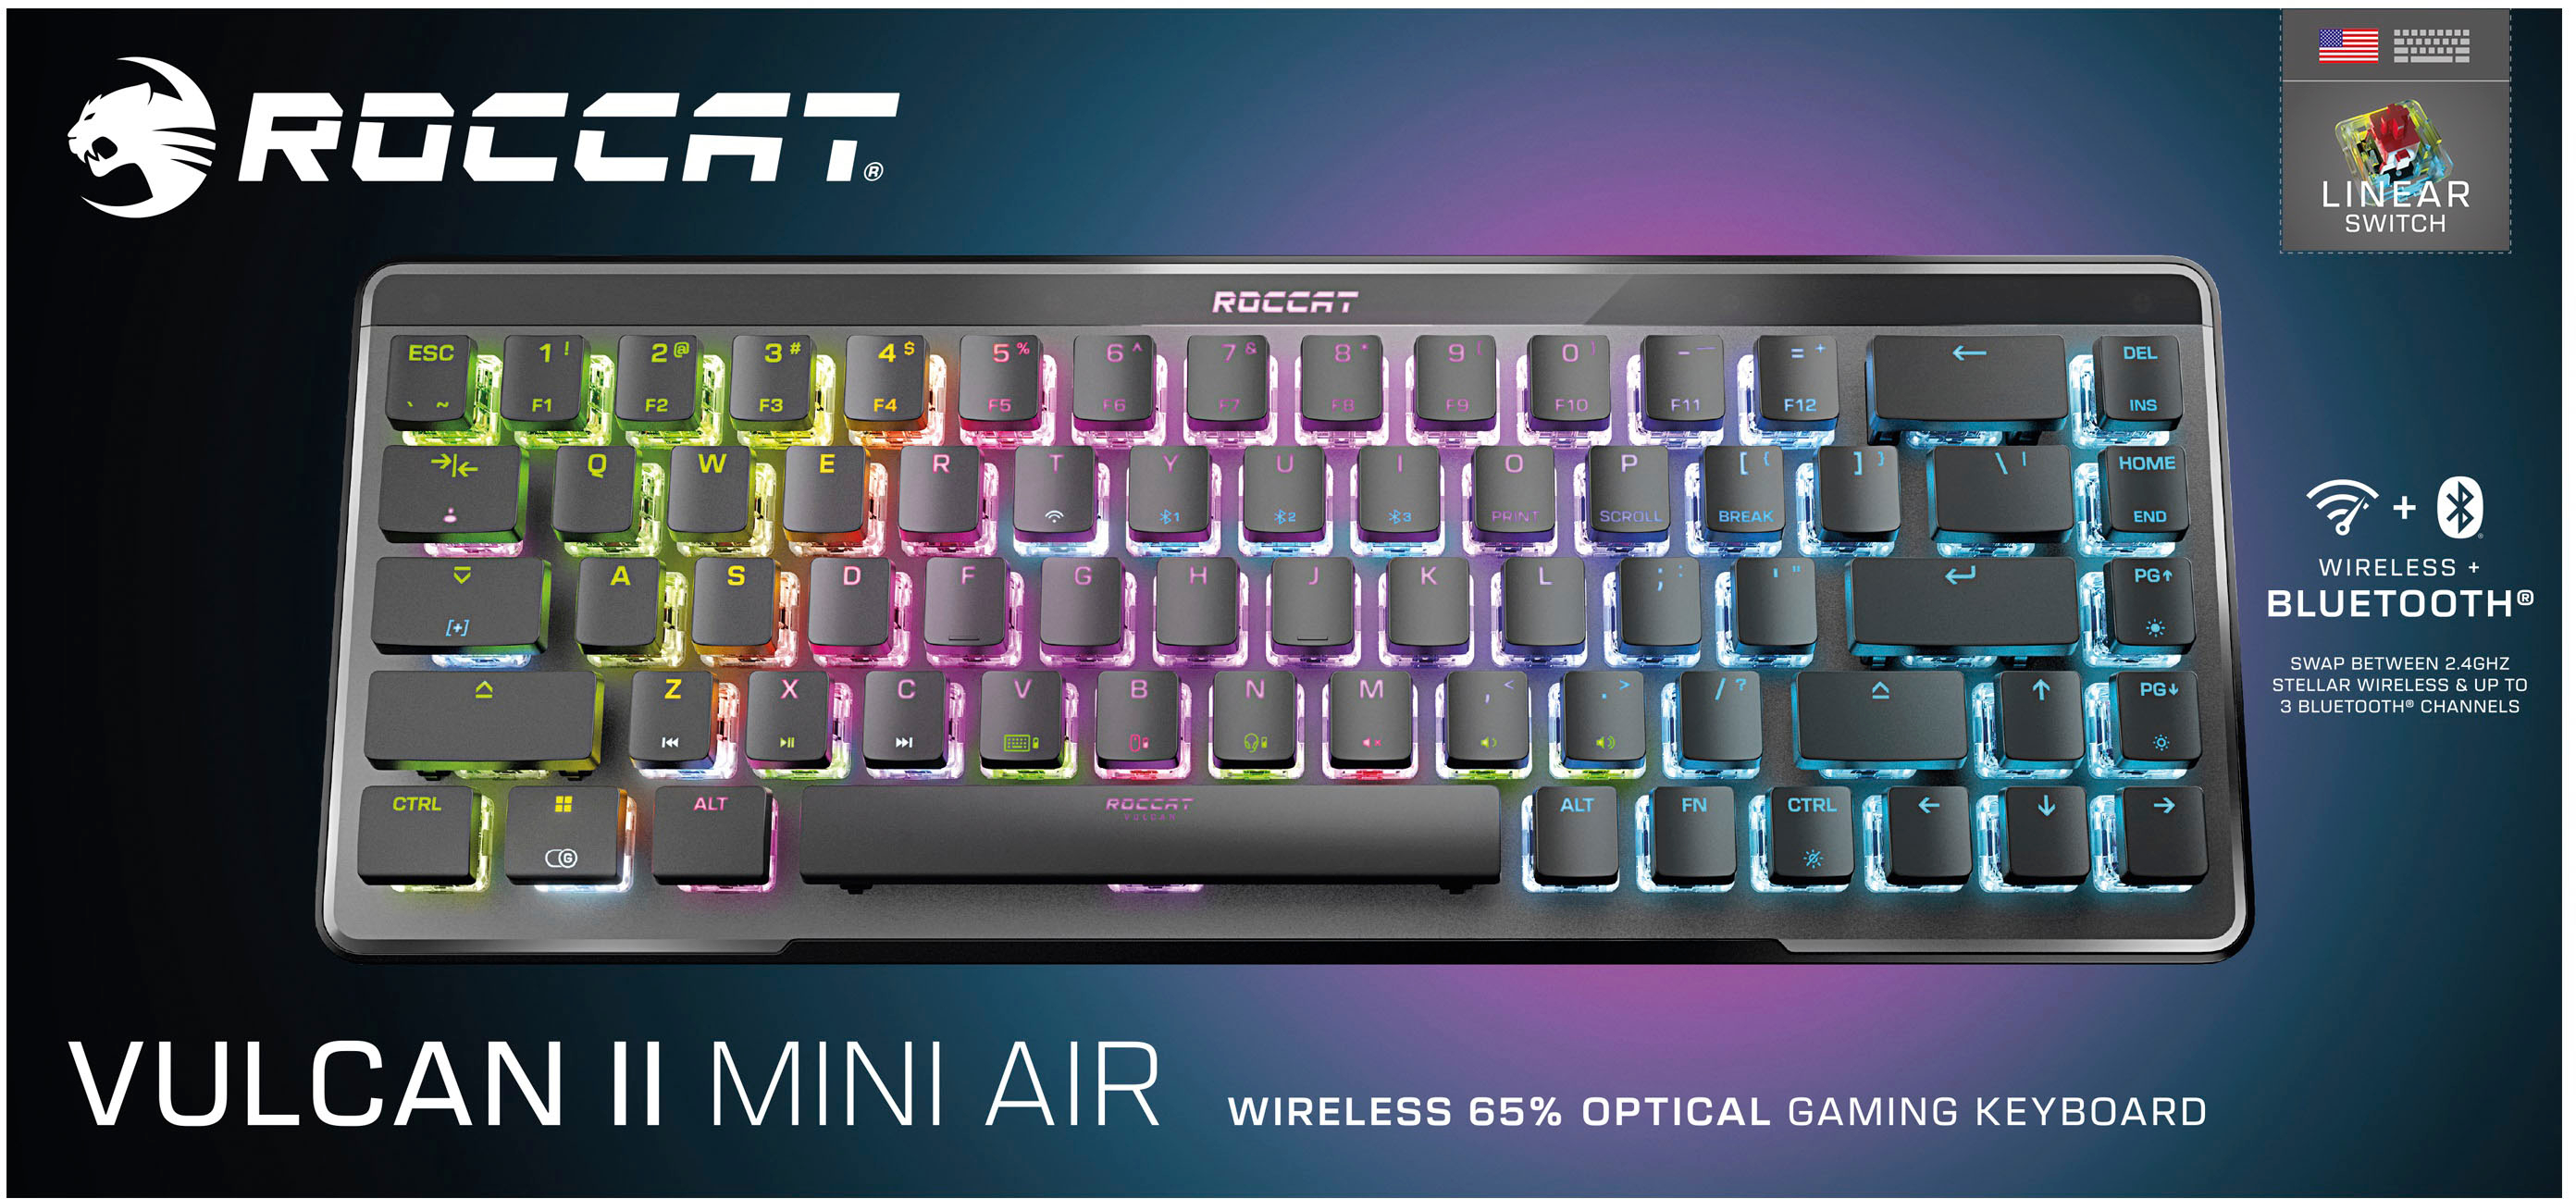 ROCCAT's 65% wireless keyboard, Vulcan II Mini Air, will be available on  July 7 and is available for pre-order - Saiga NAK